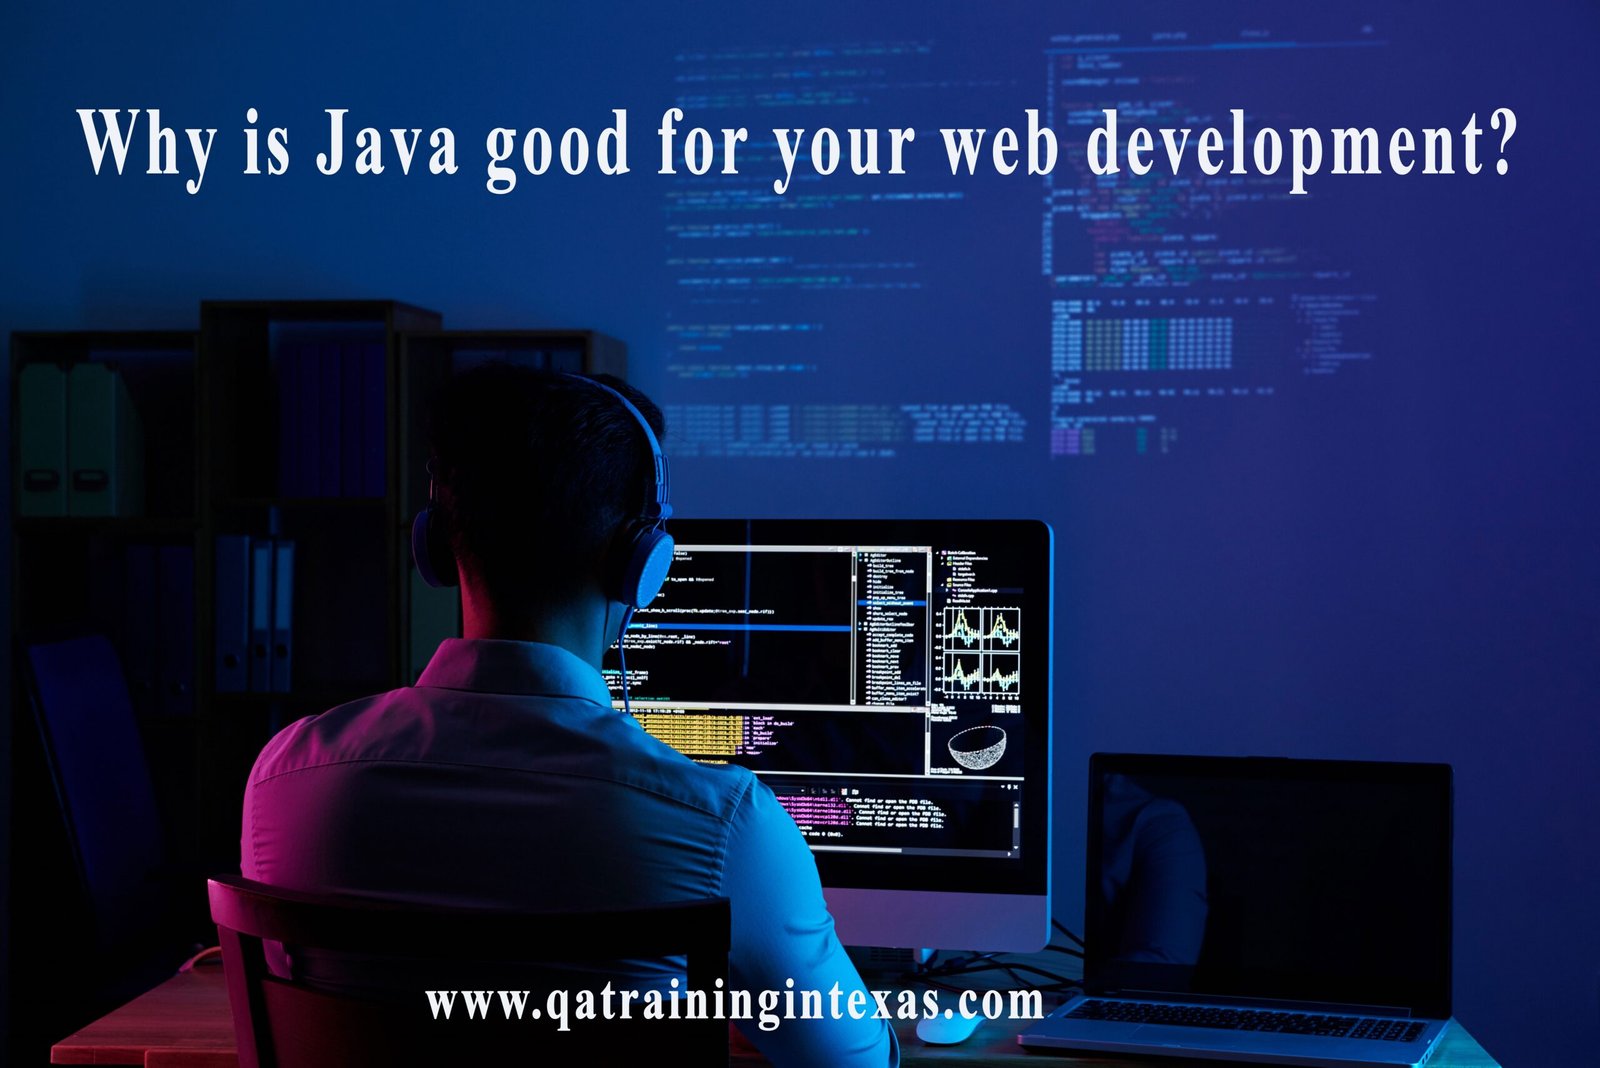 Why is Java good for your web development?